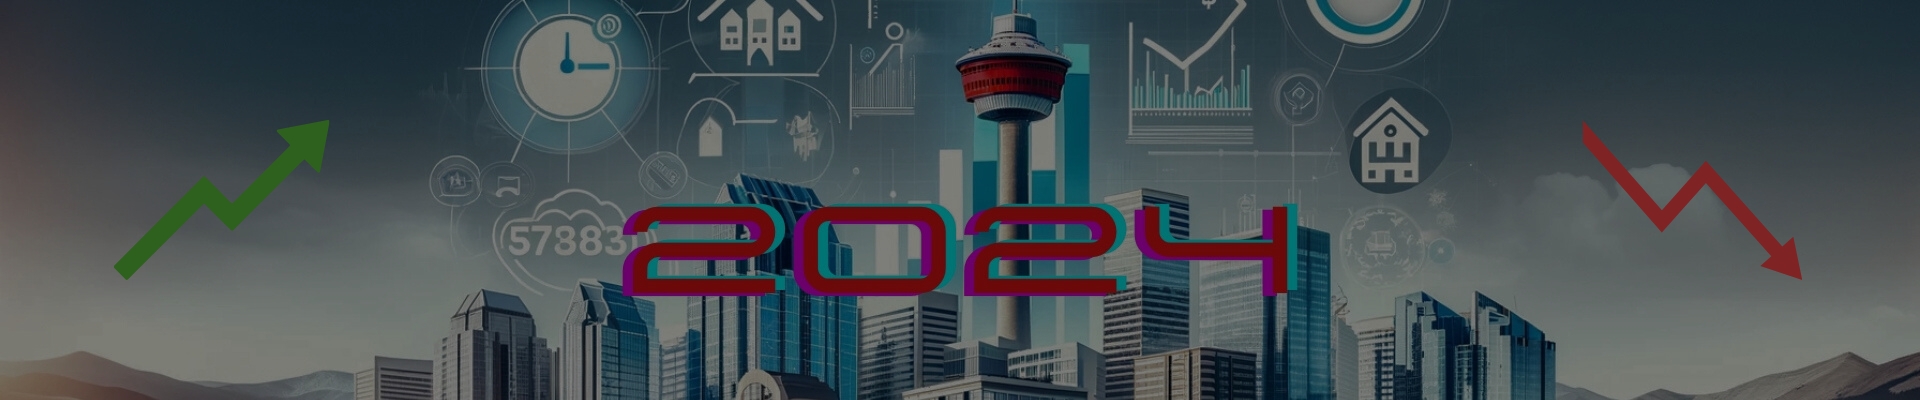 Calgary Housing Market Forecast 2024. Navigating Calgary's Real Estate Market. Projections for the future.